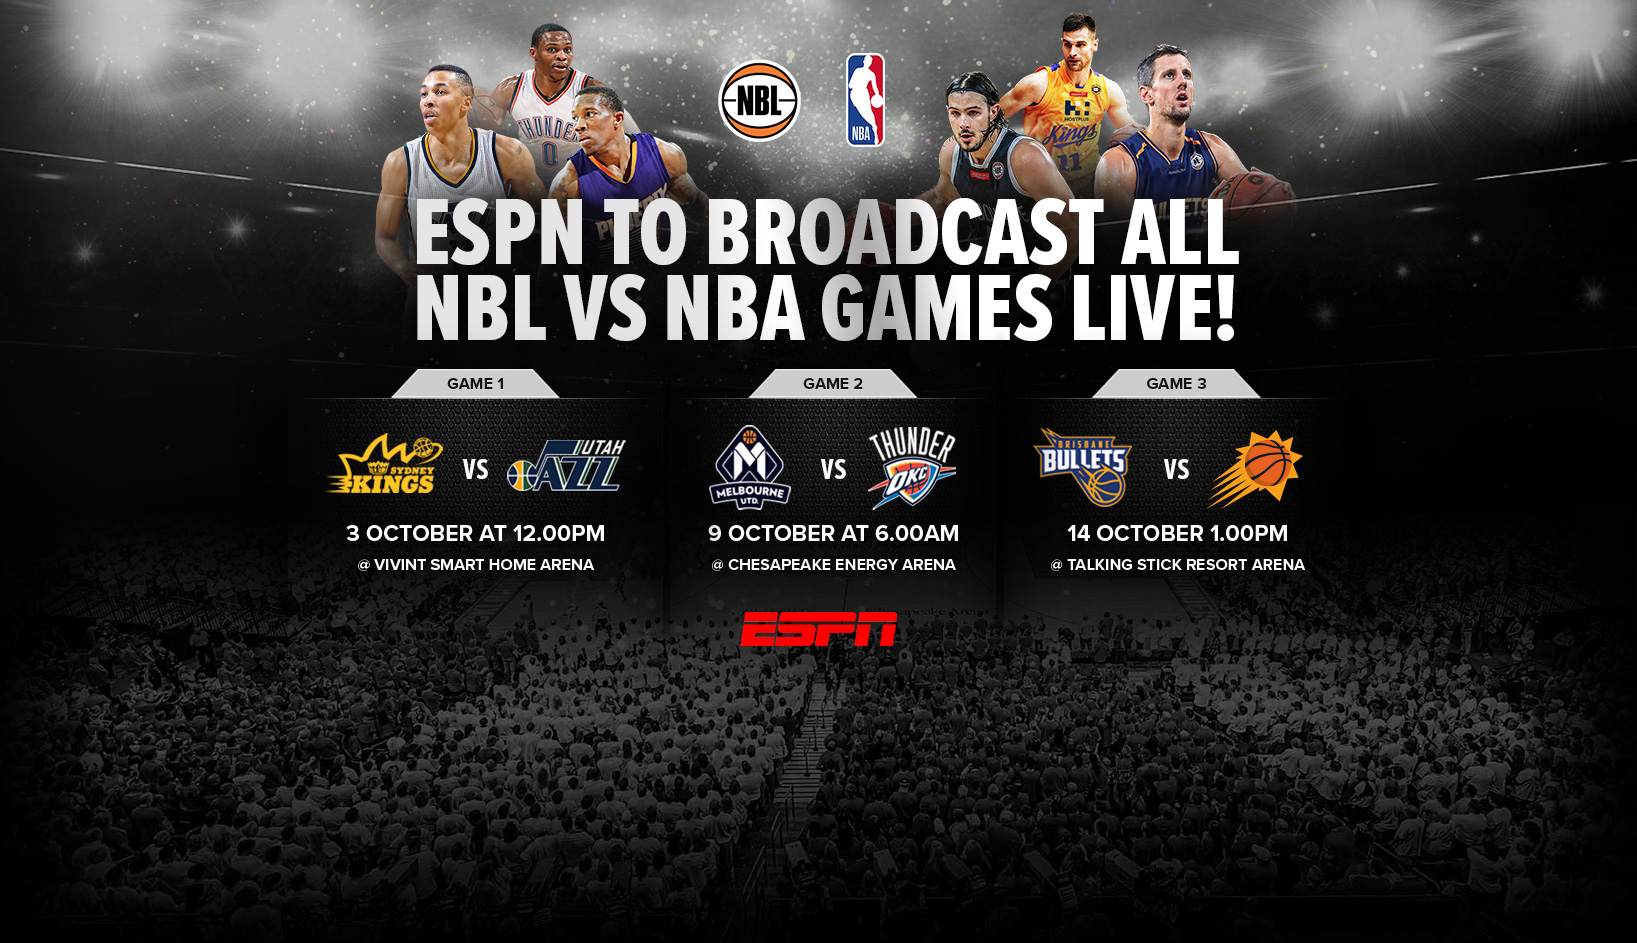 ESPN to broadcast all NBL x NBA games